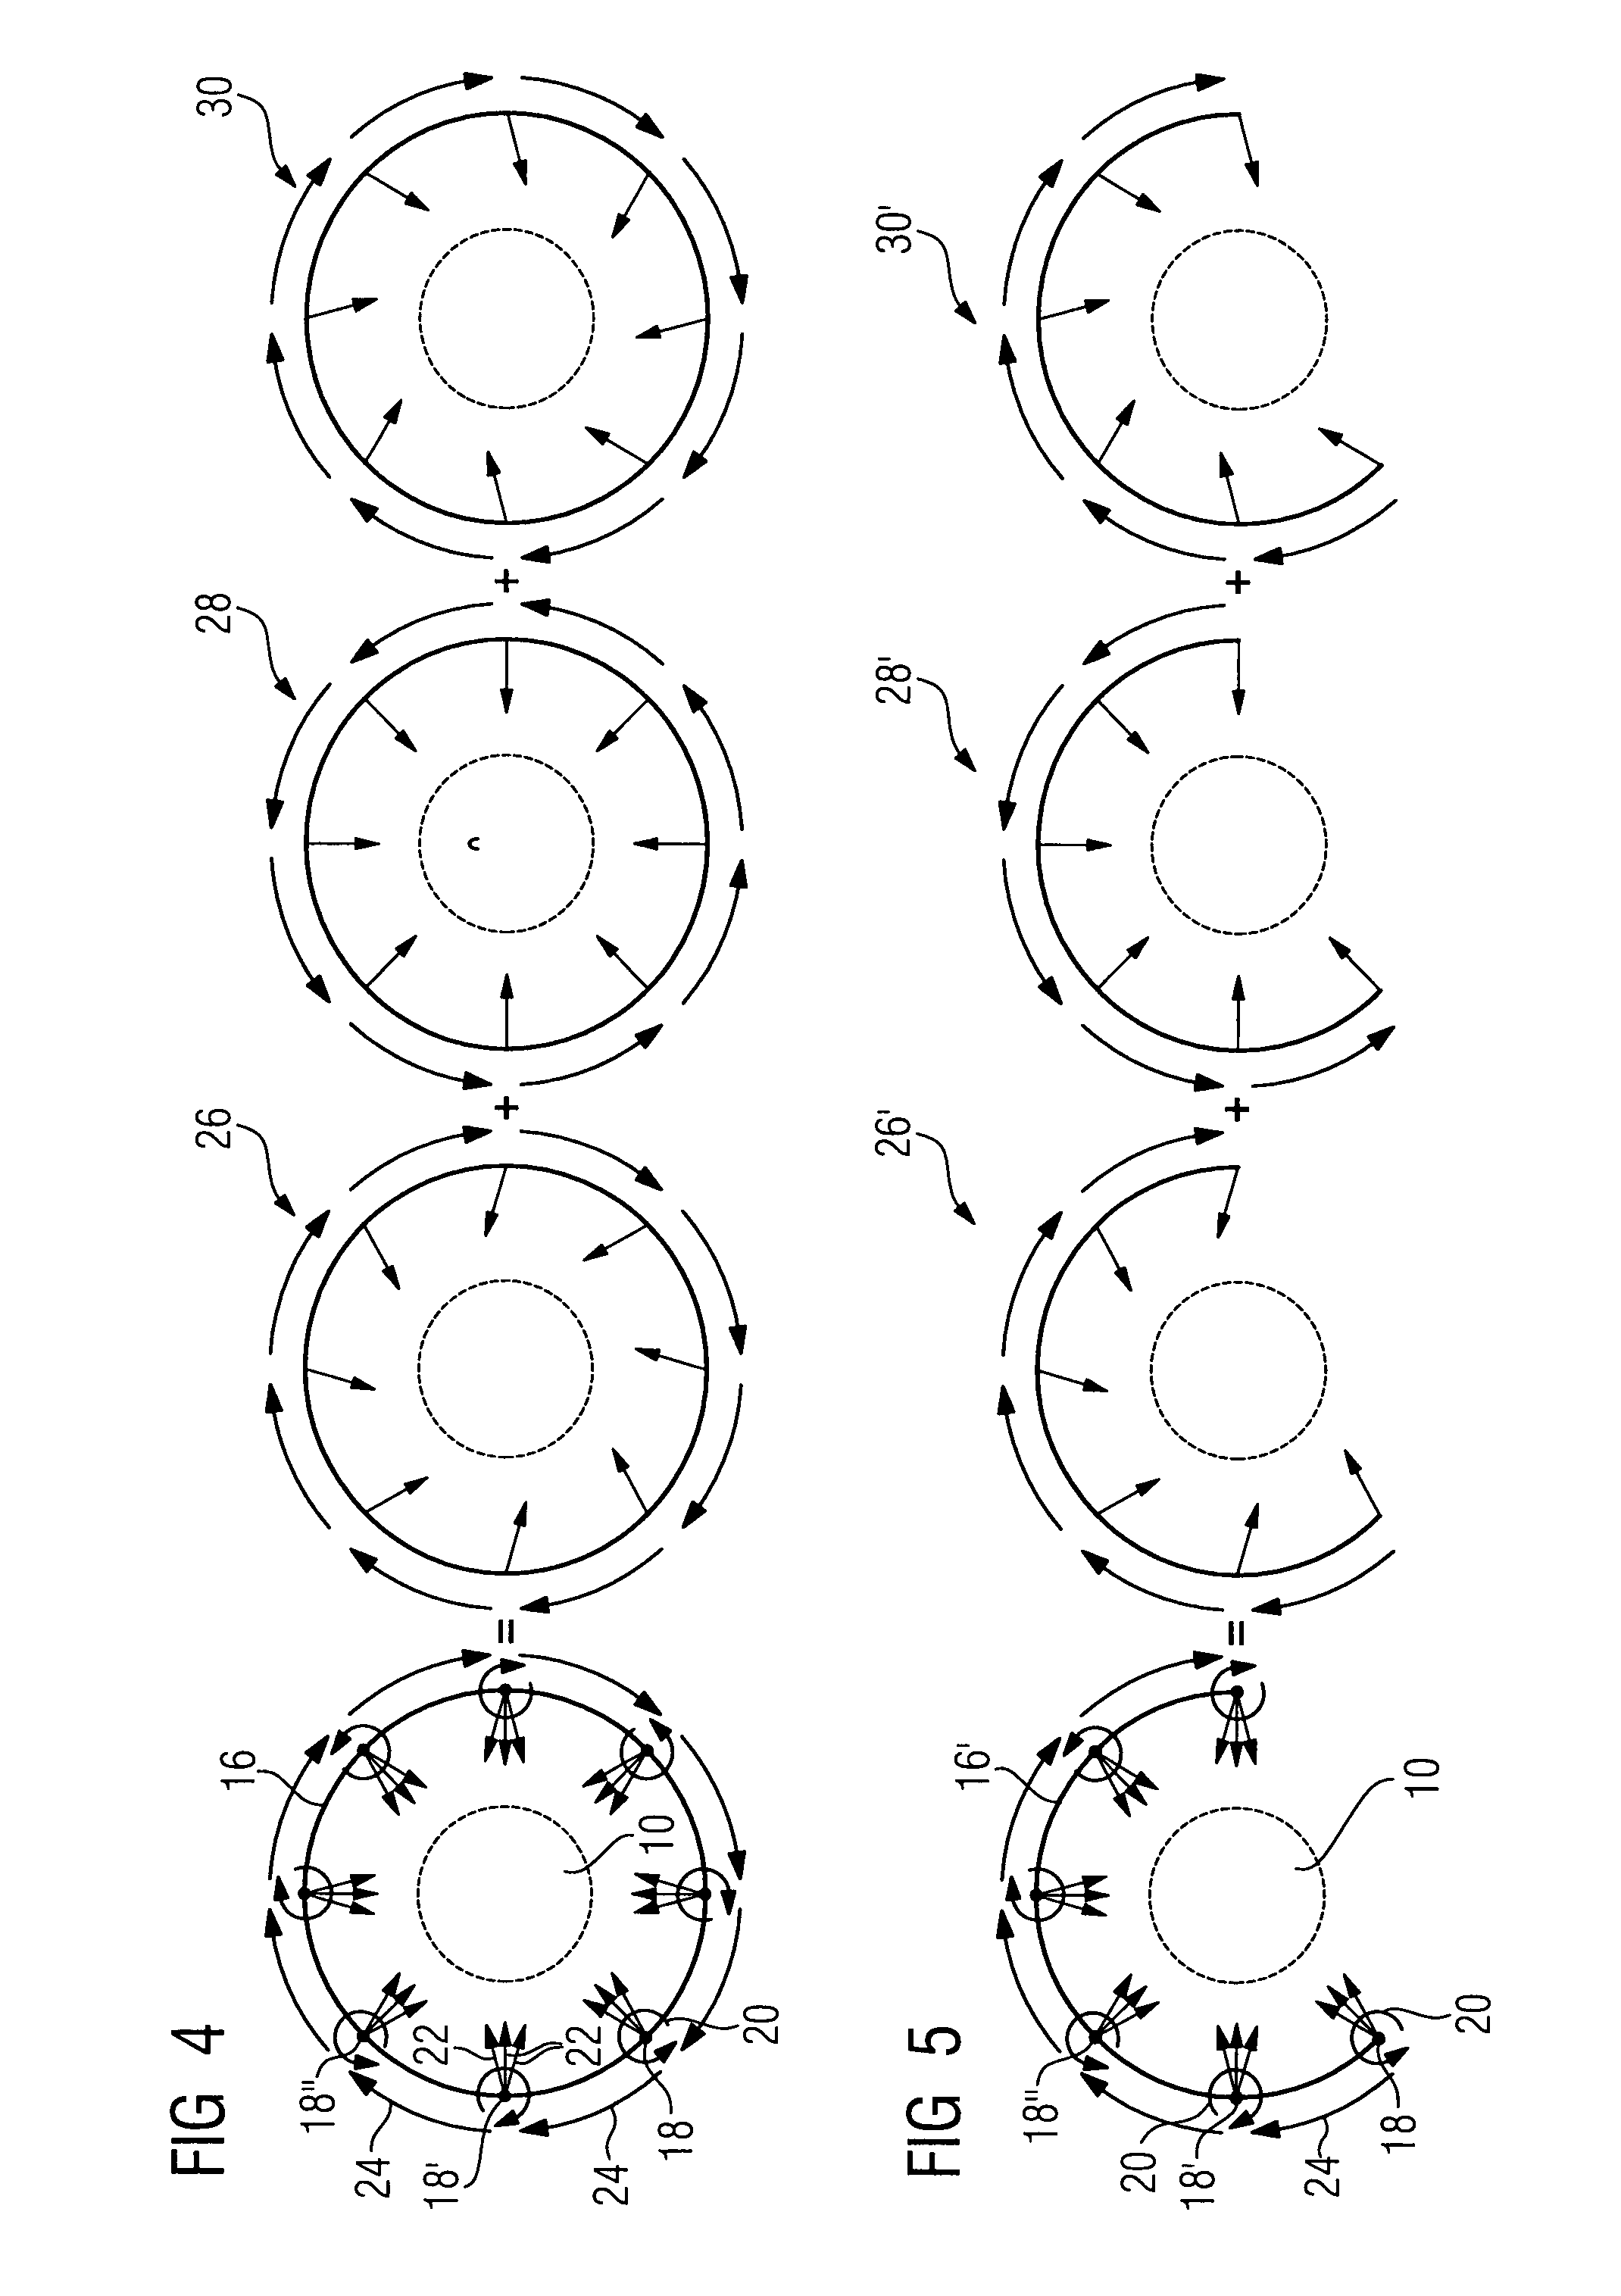 Method for determining gray-scale values for volume elements of bodies to be mapped